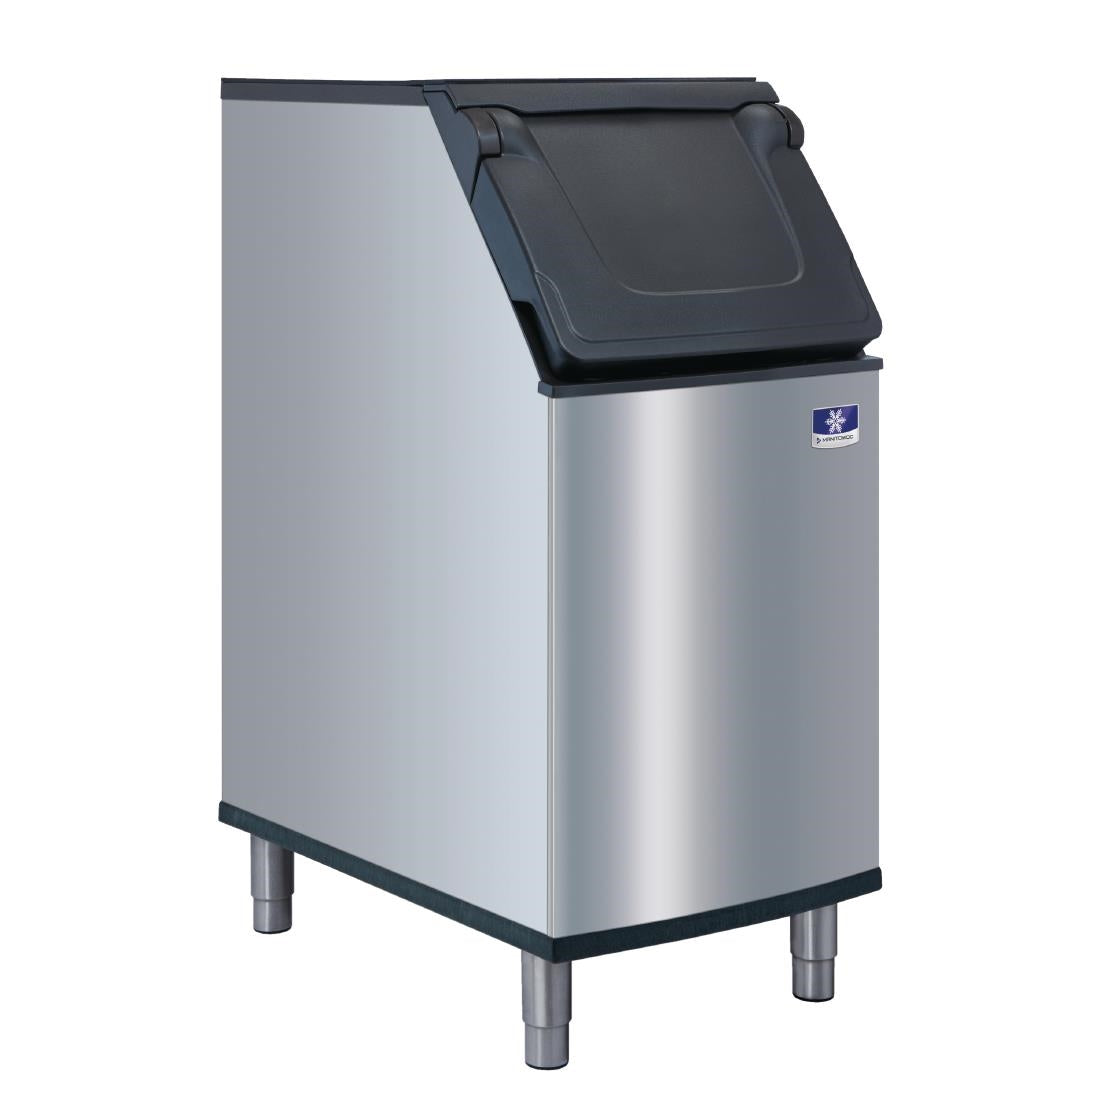 DW663 Manitowoc Indigo Modular Air-cooled Ice Maker IDT0620A with Storage Bin D420 JD Catering Equipment Solutions Ltd